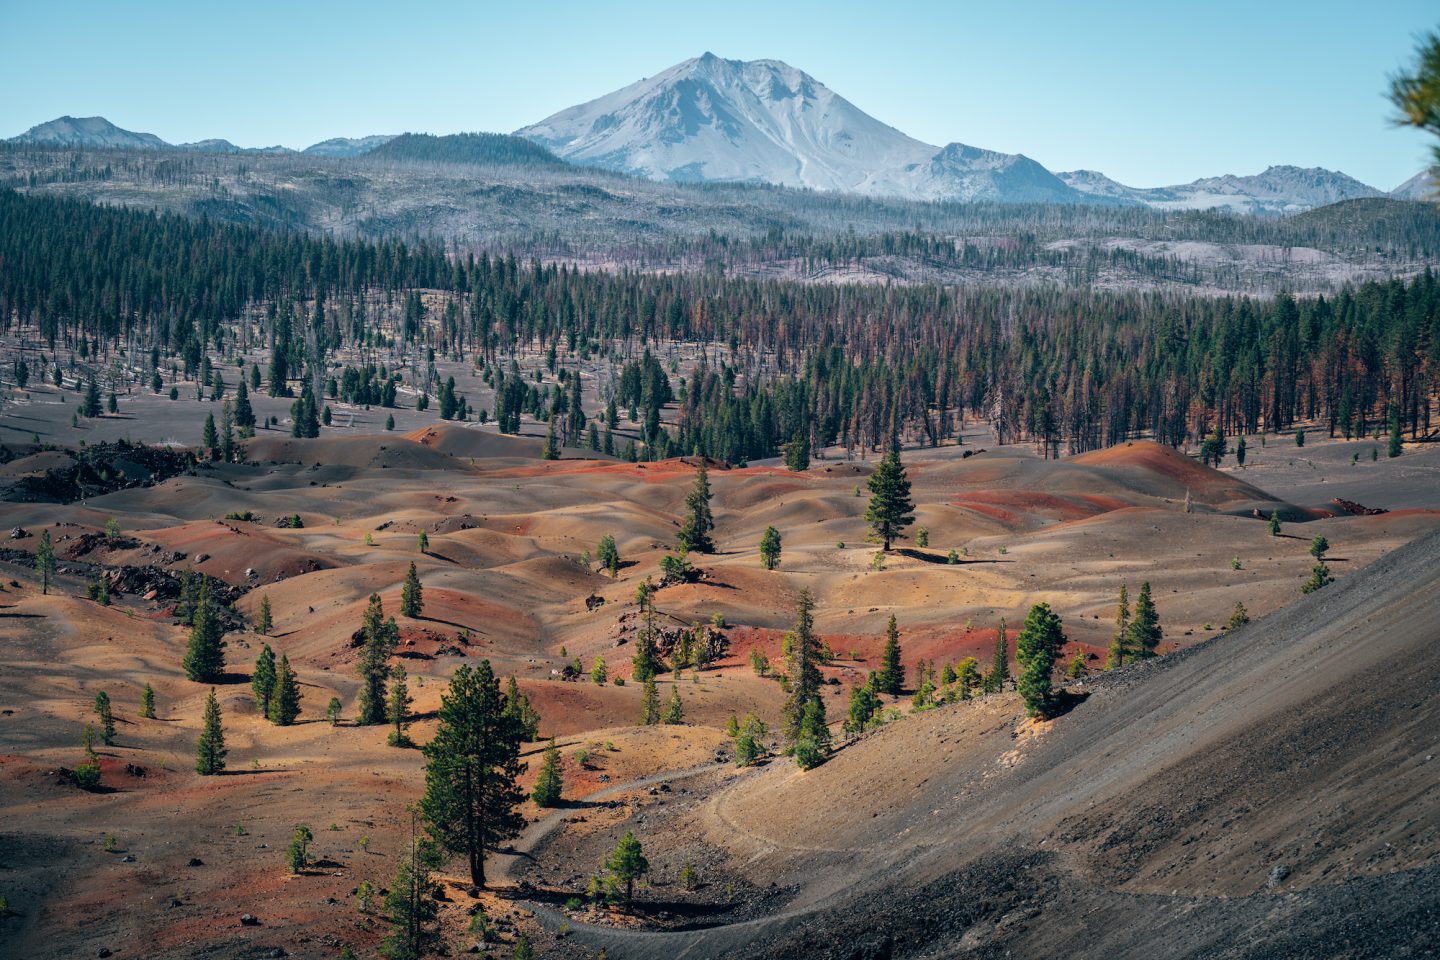 Painted Dunes from Cinder Cone in Lassen Volcanic National Park